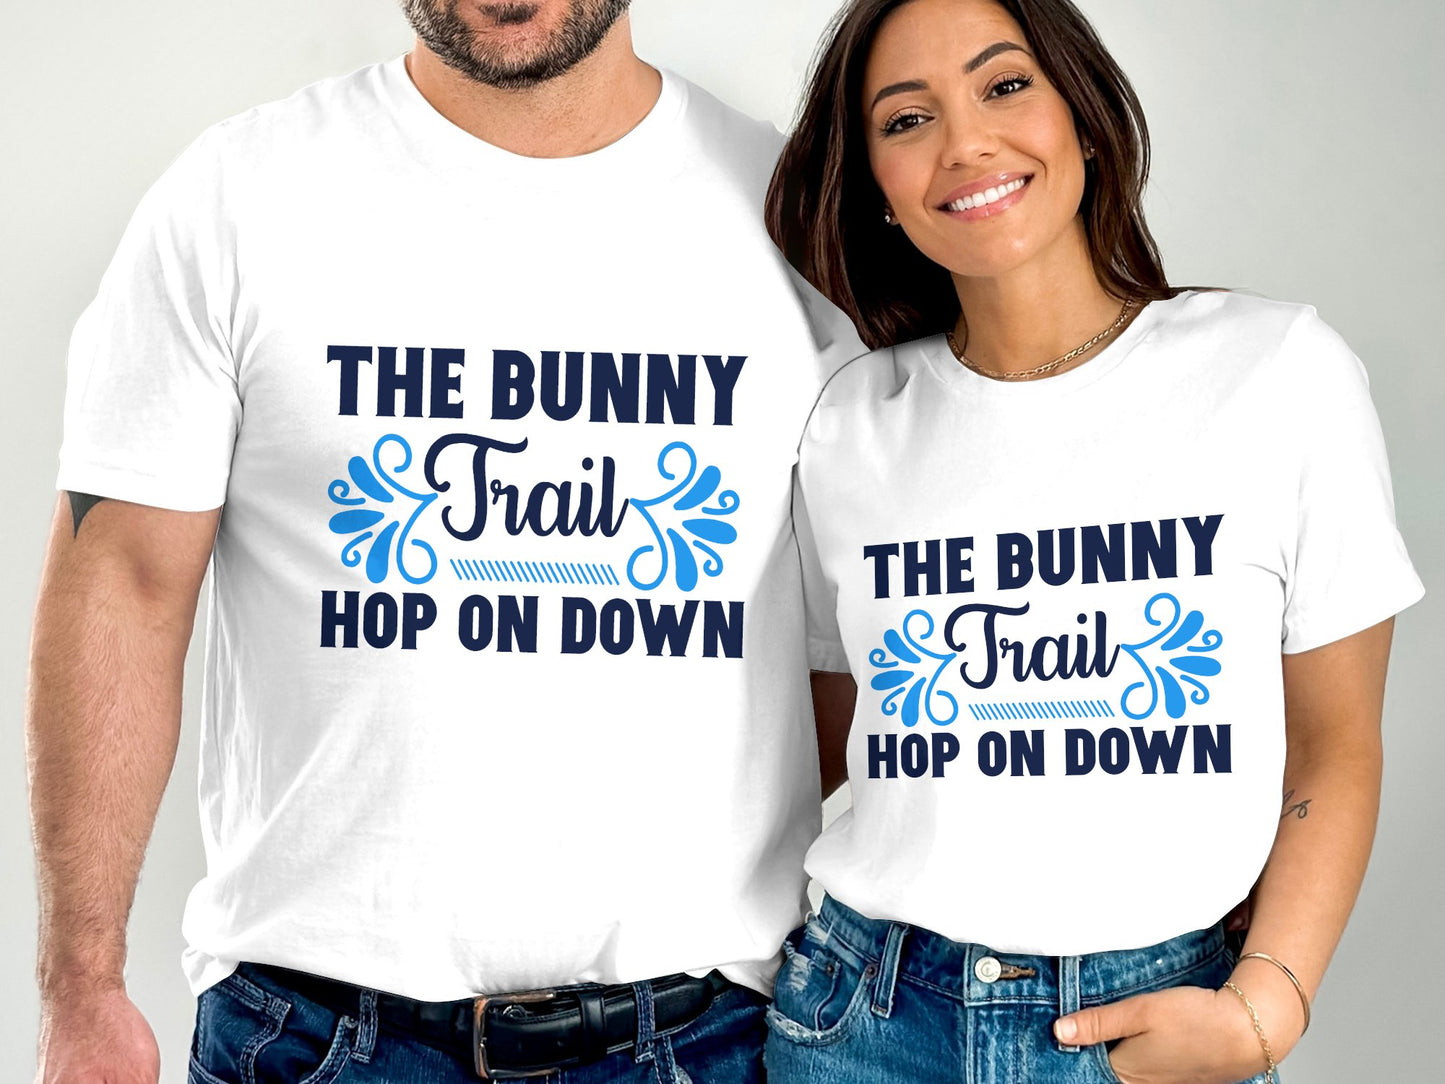 The Bunny Trail Hop on Down